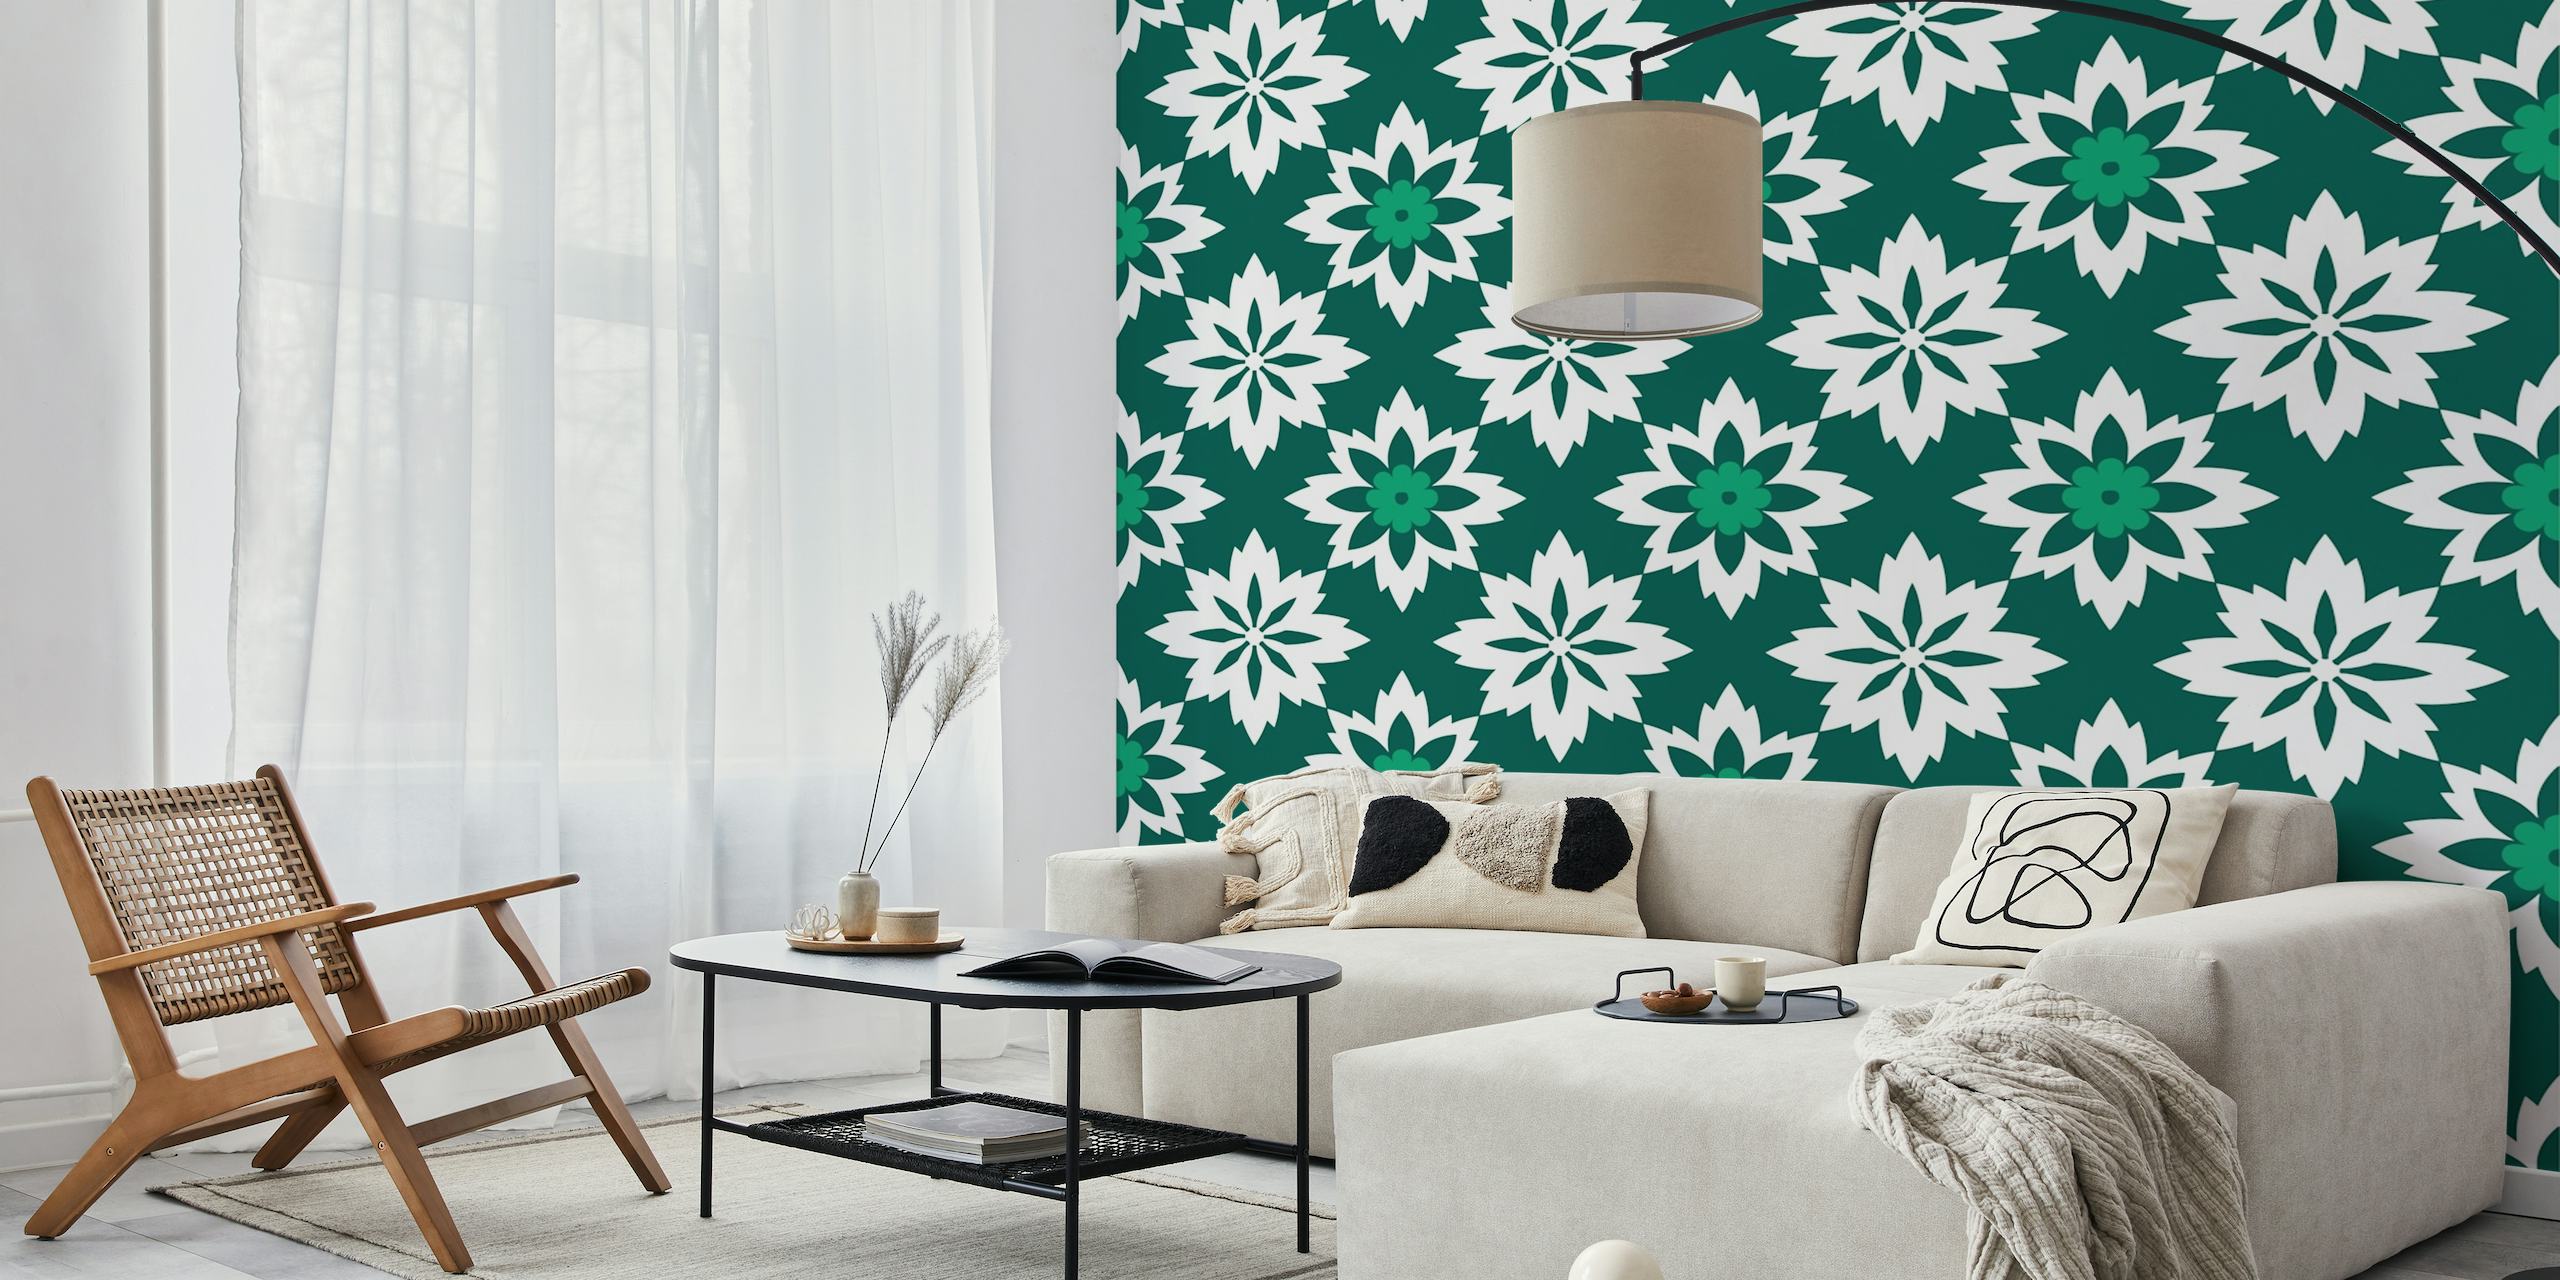 Morrocan abstract floral pattern forest green wallpaper